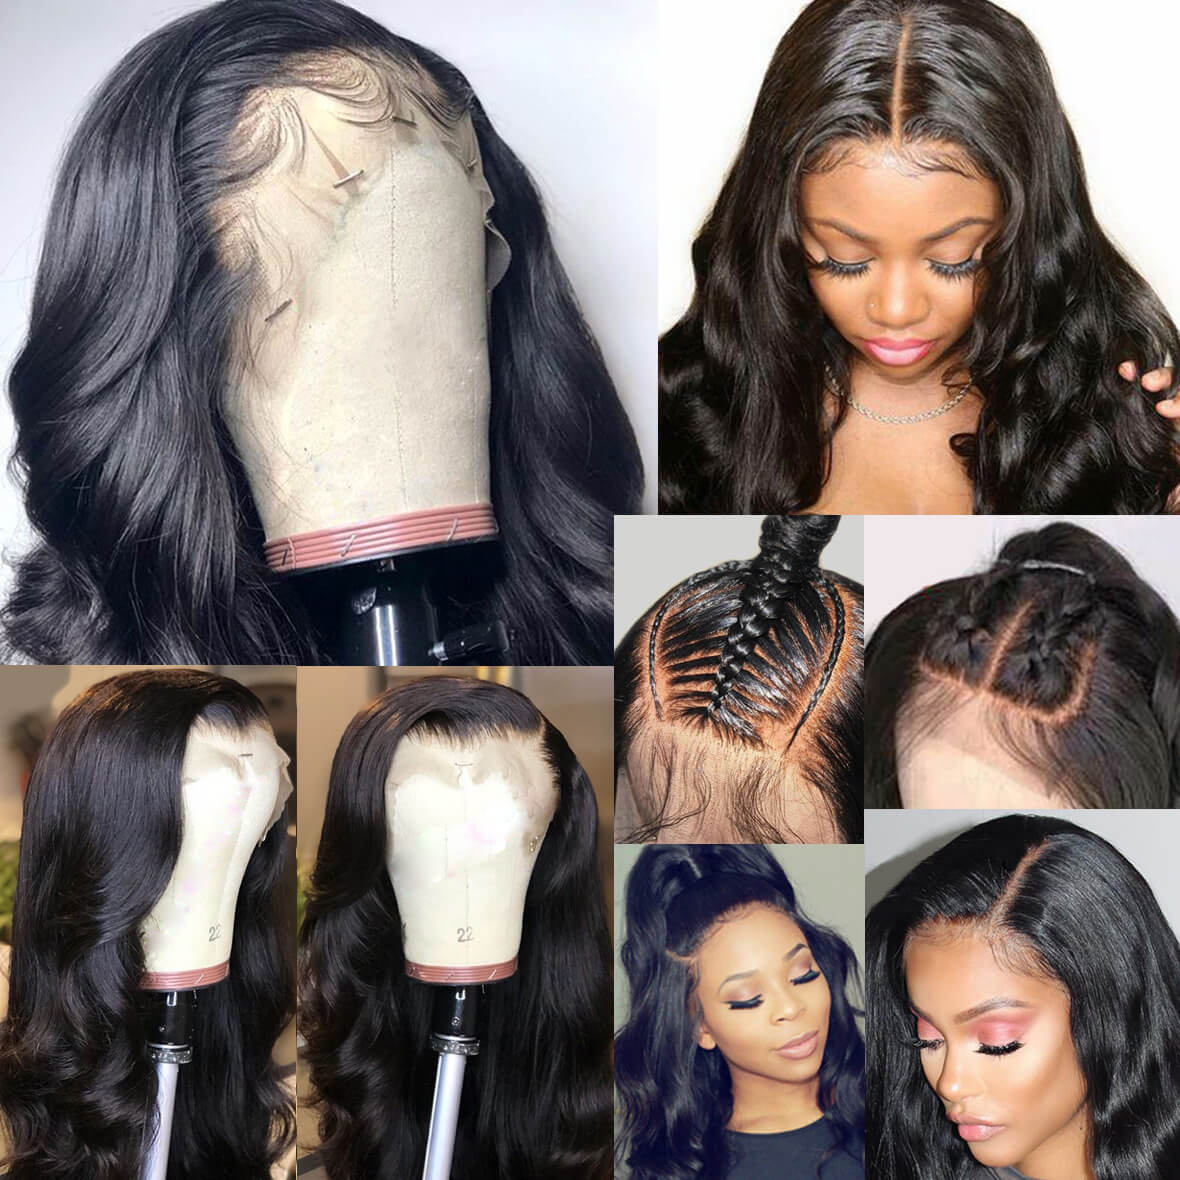 13x4 Body Wave Lace Front Human Hair Wigs 150% Density Unprocessed Brazilian Virgin Human Hair Wigs with Baby Hair Pre Plucked Natural Hairline for Women